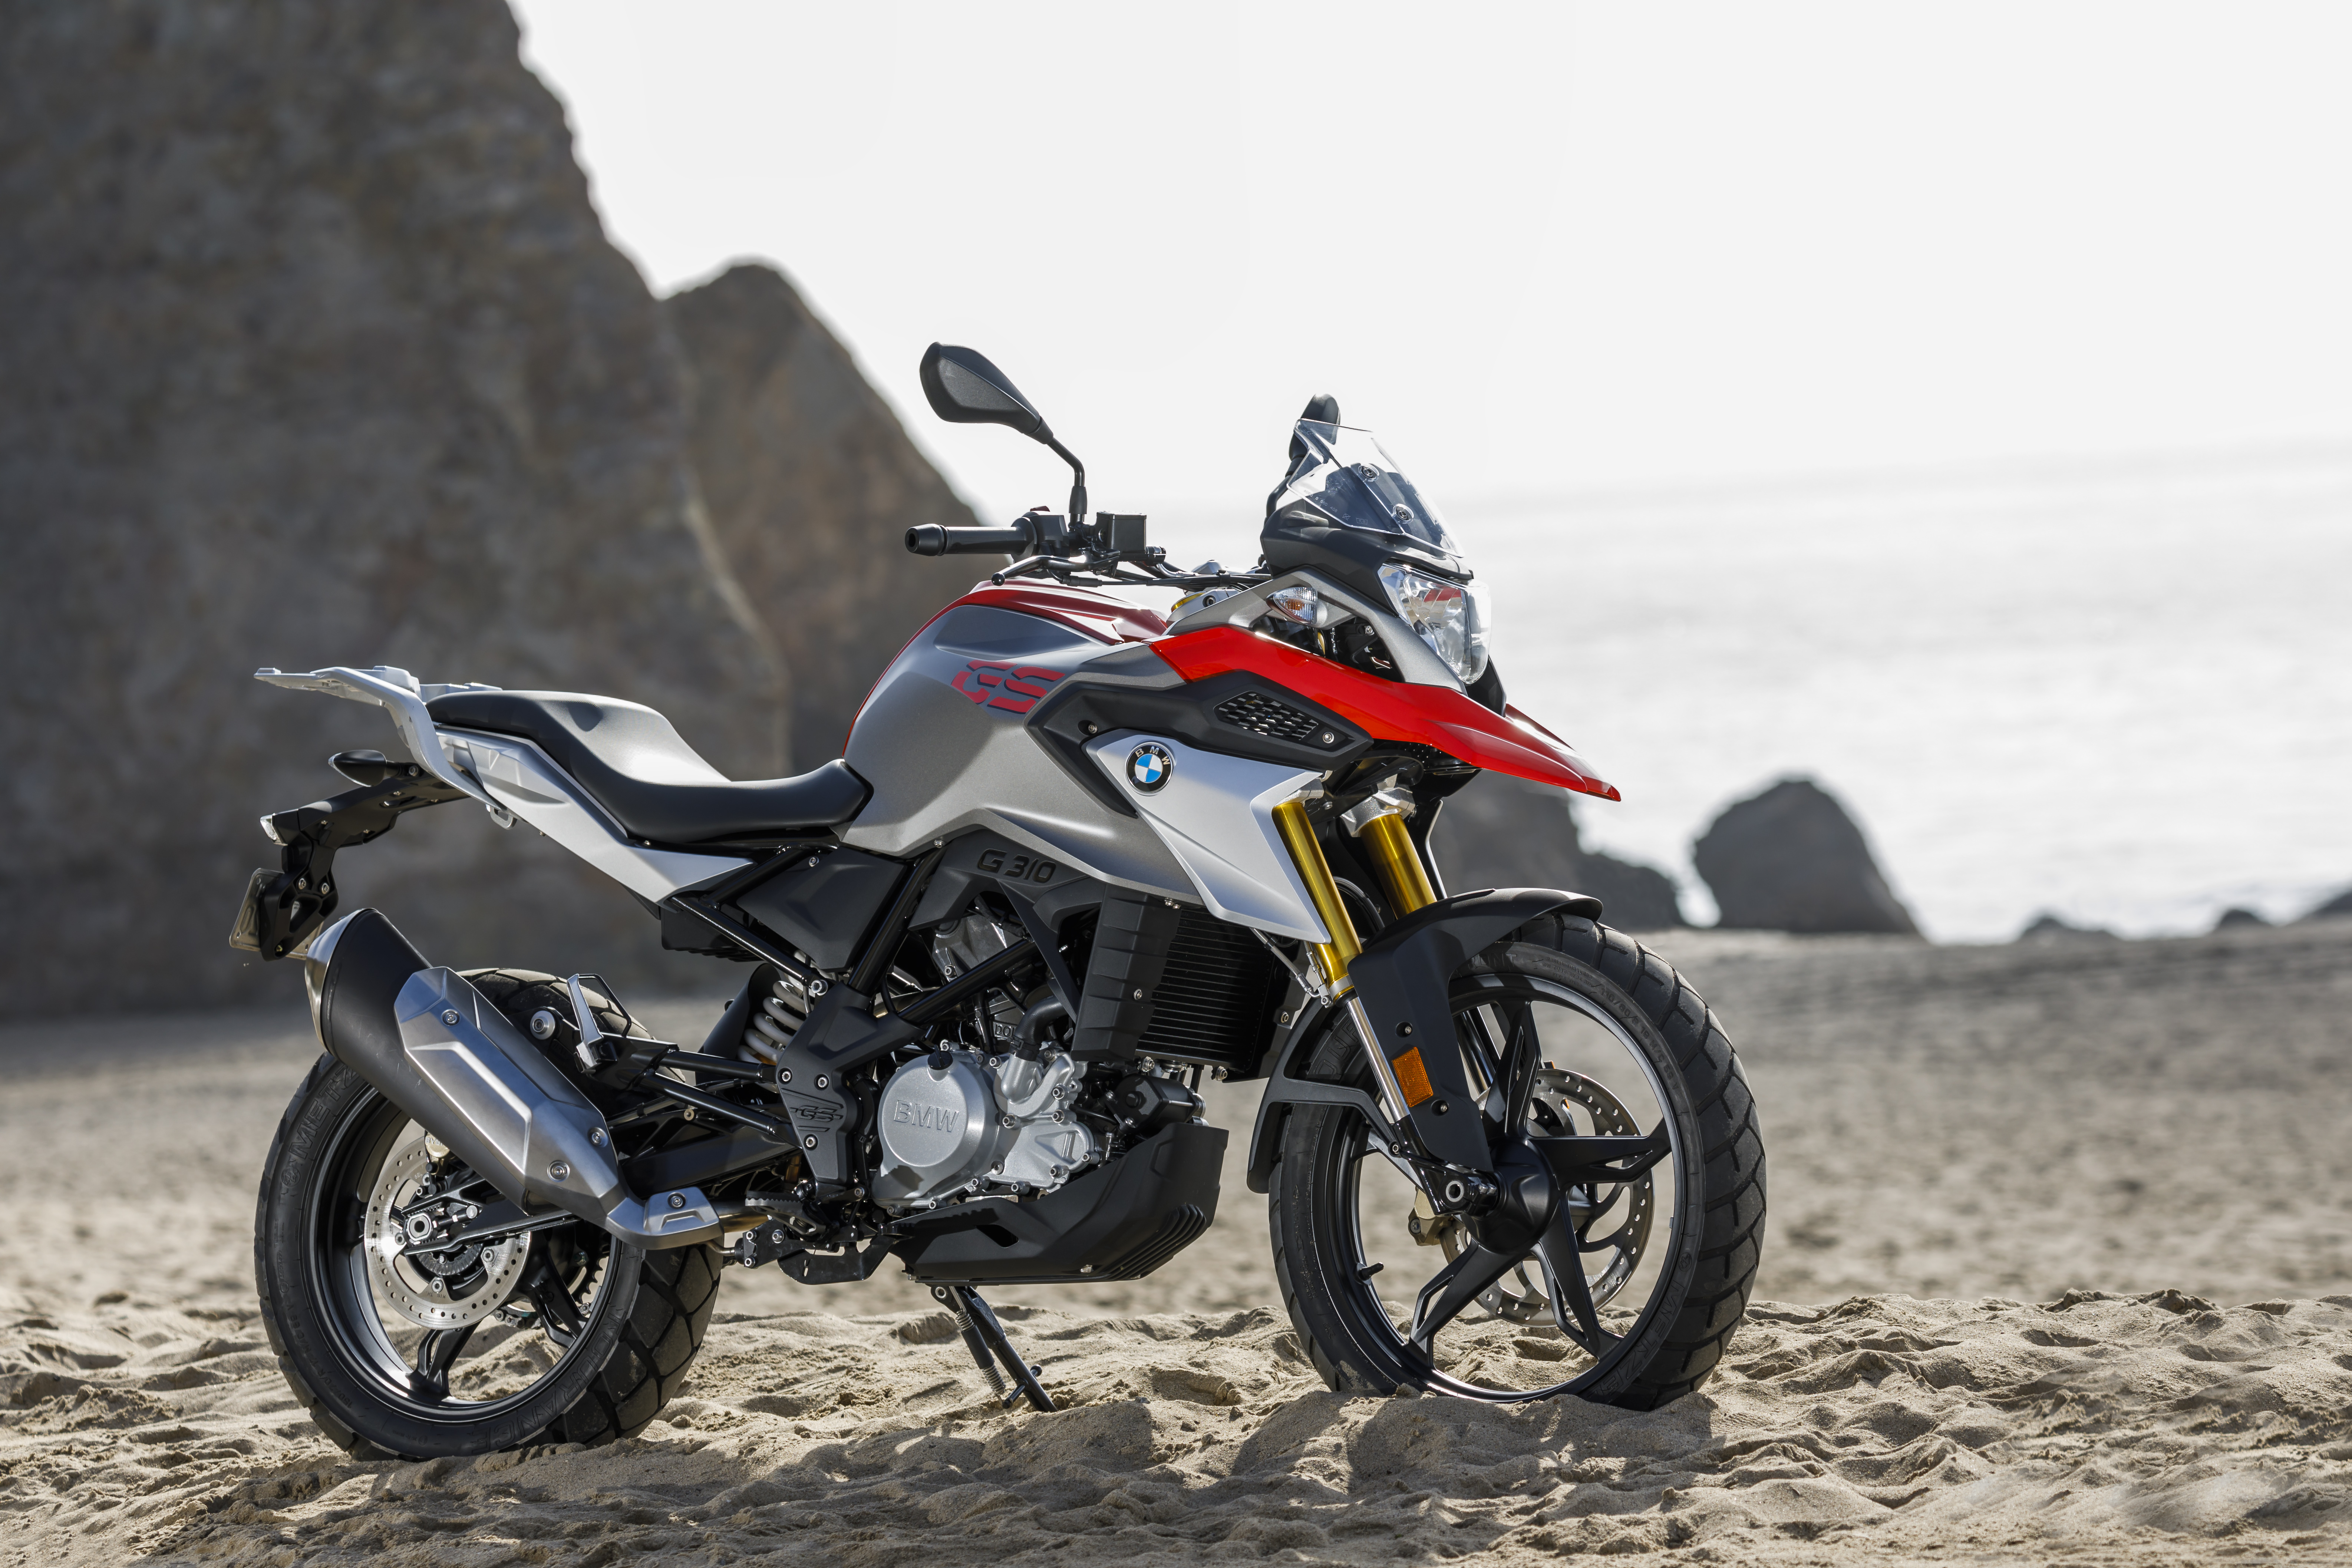 bmw-s-1000-rr-hp4-race-bmw-g-310-gs-and-bmw-s-1000-xr-launched-at-the